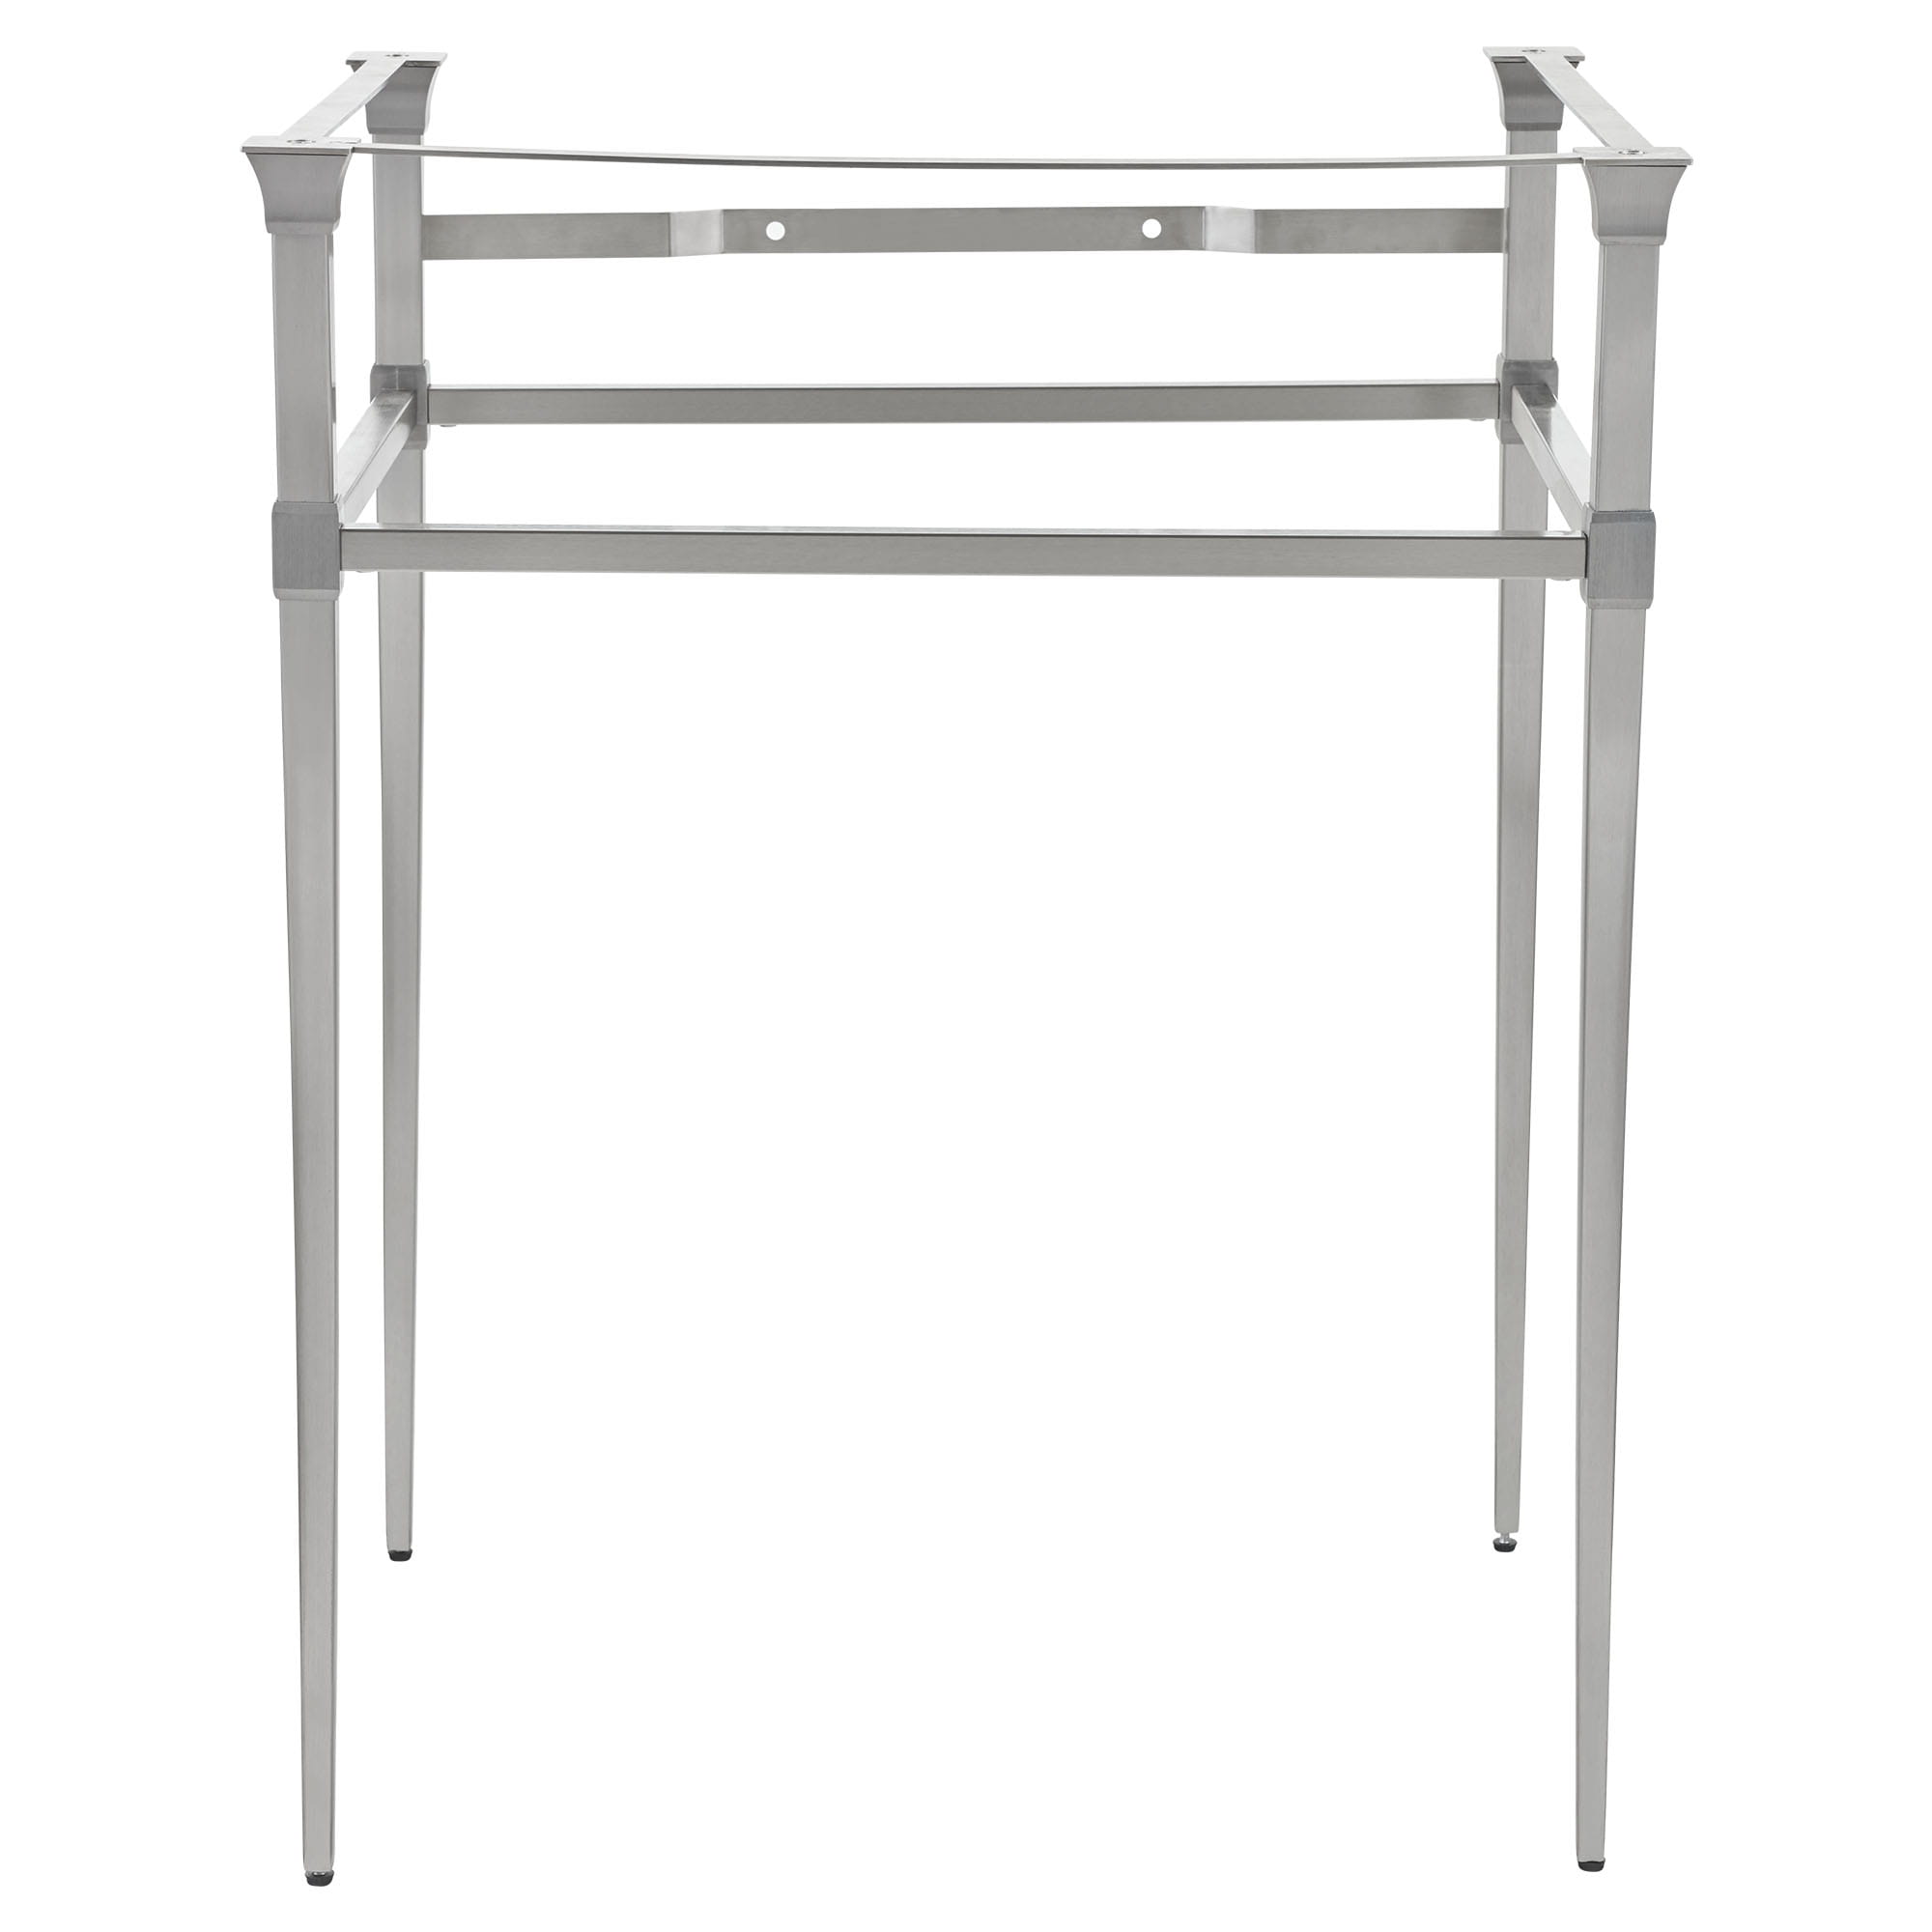 Town Square® S Console Table